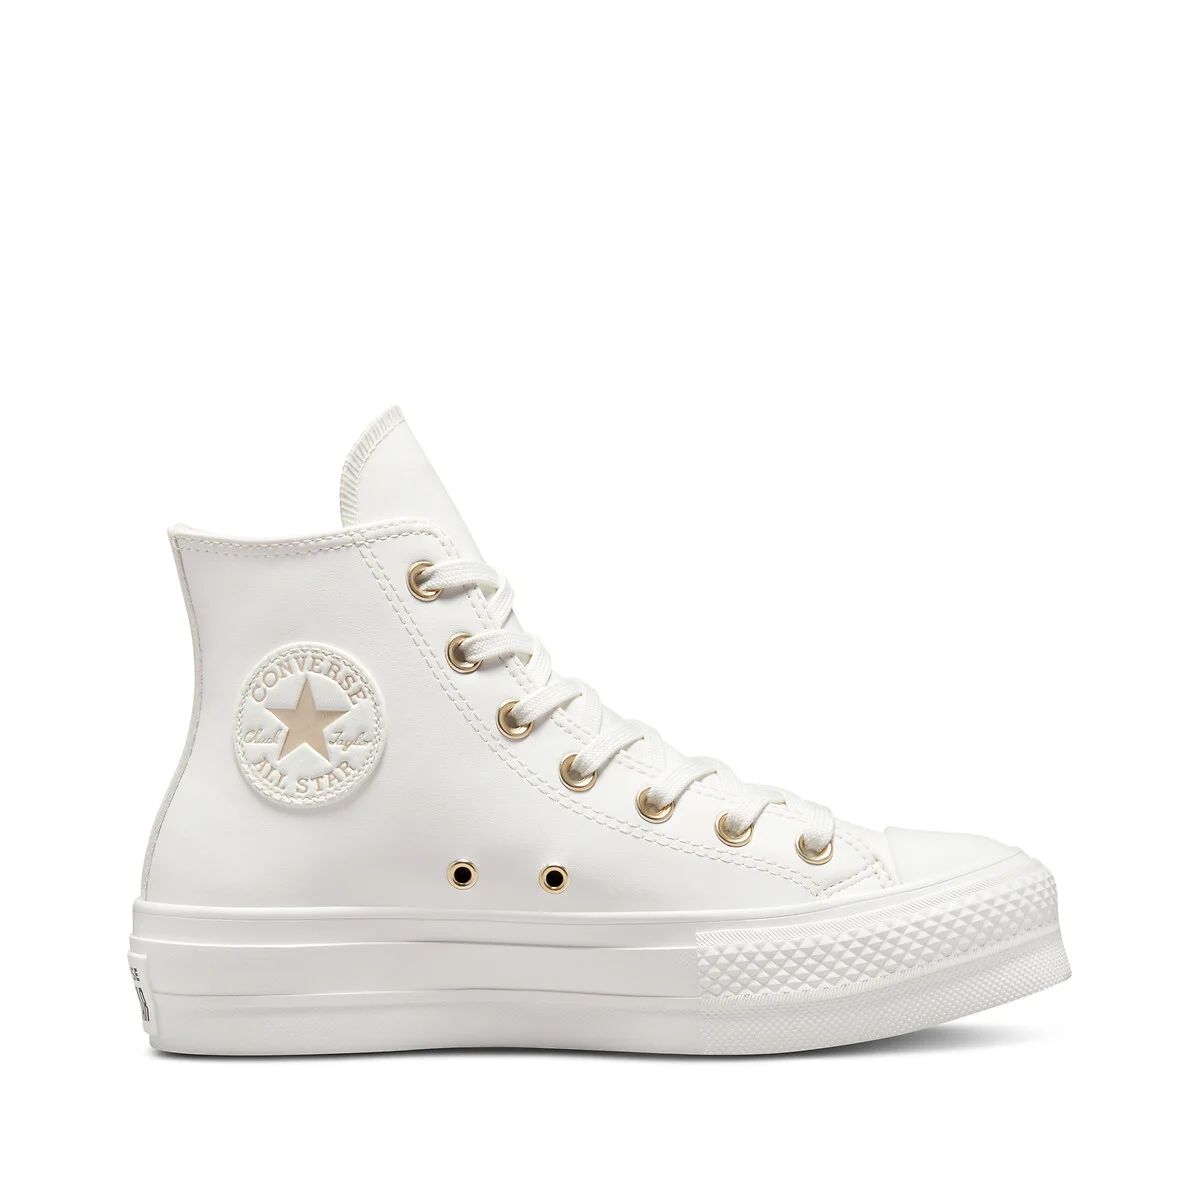 Chuck Taylor All Star Lift Mono High Top Trainers | La Redoute (UK)